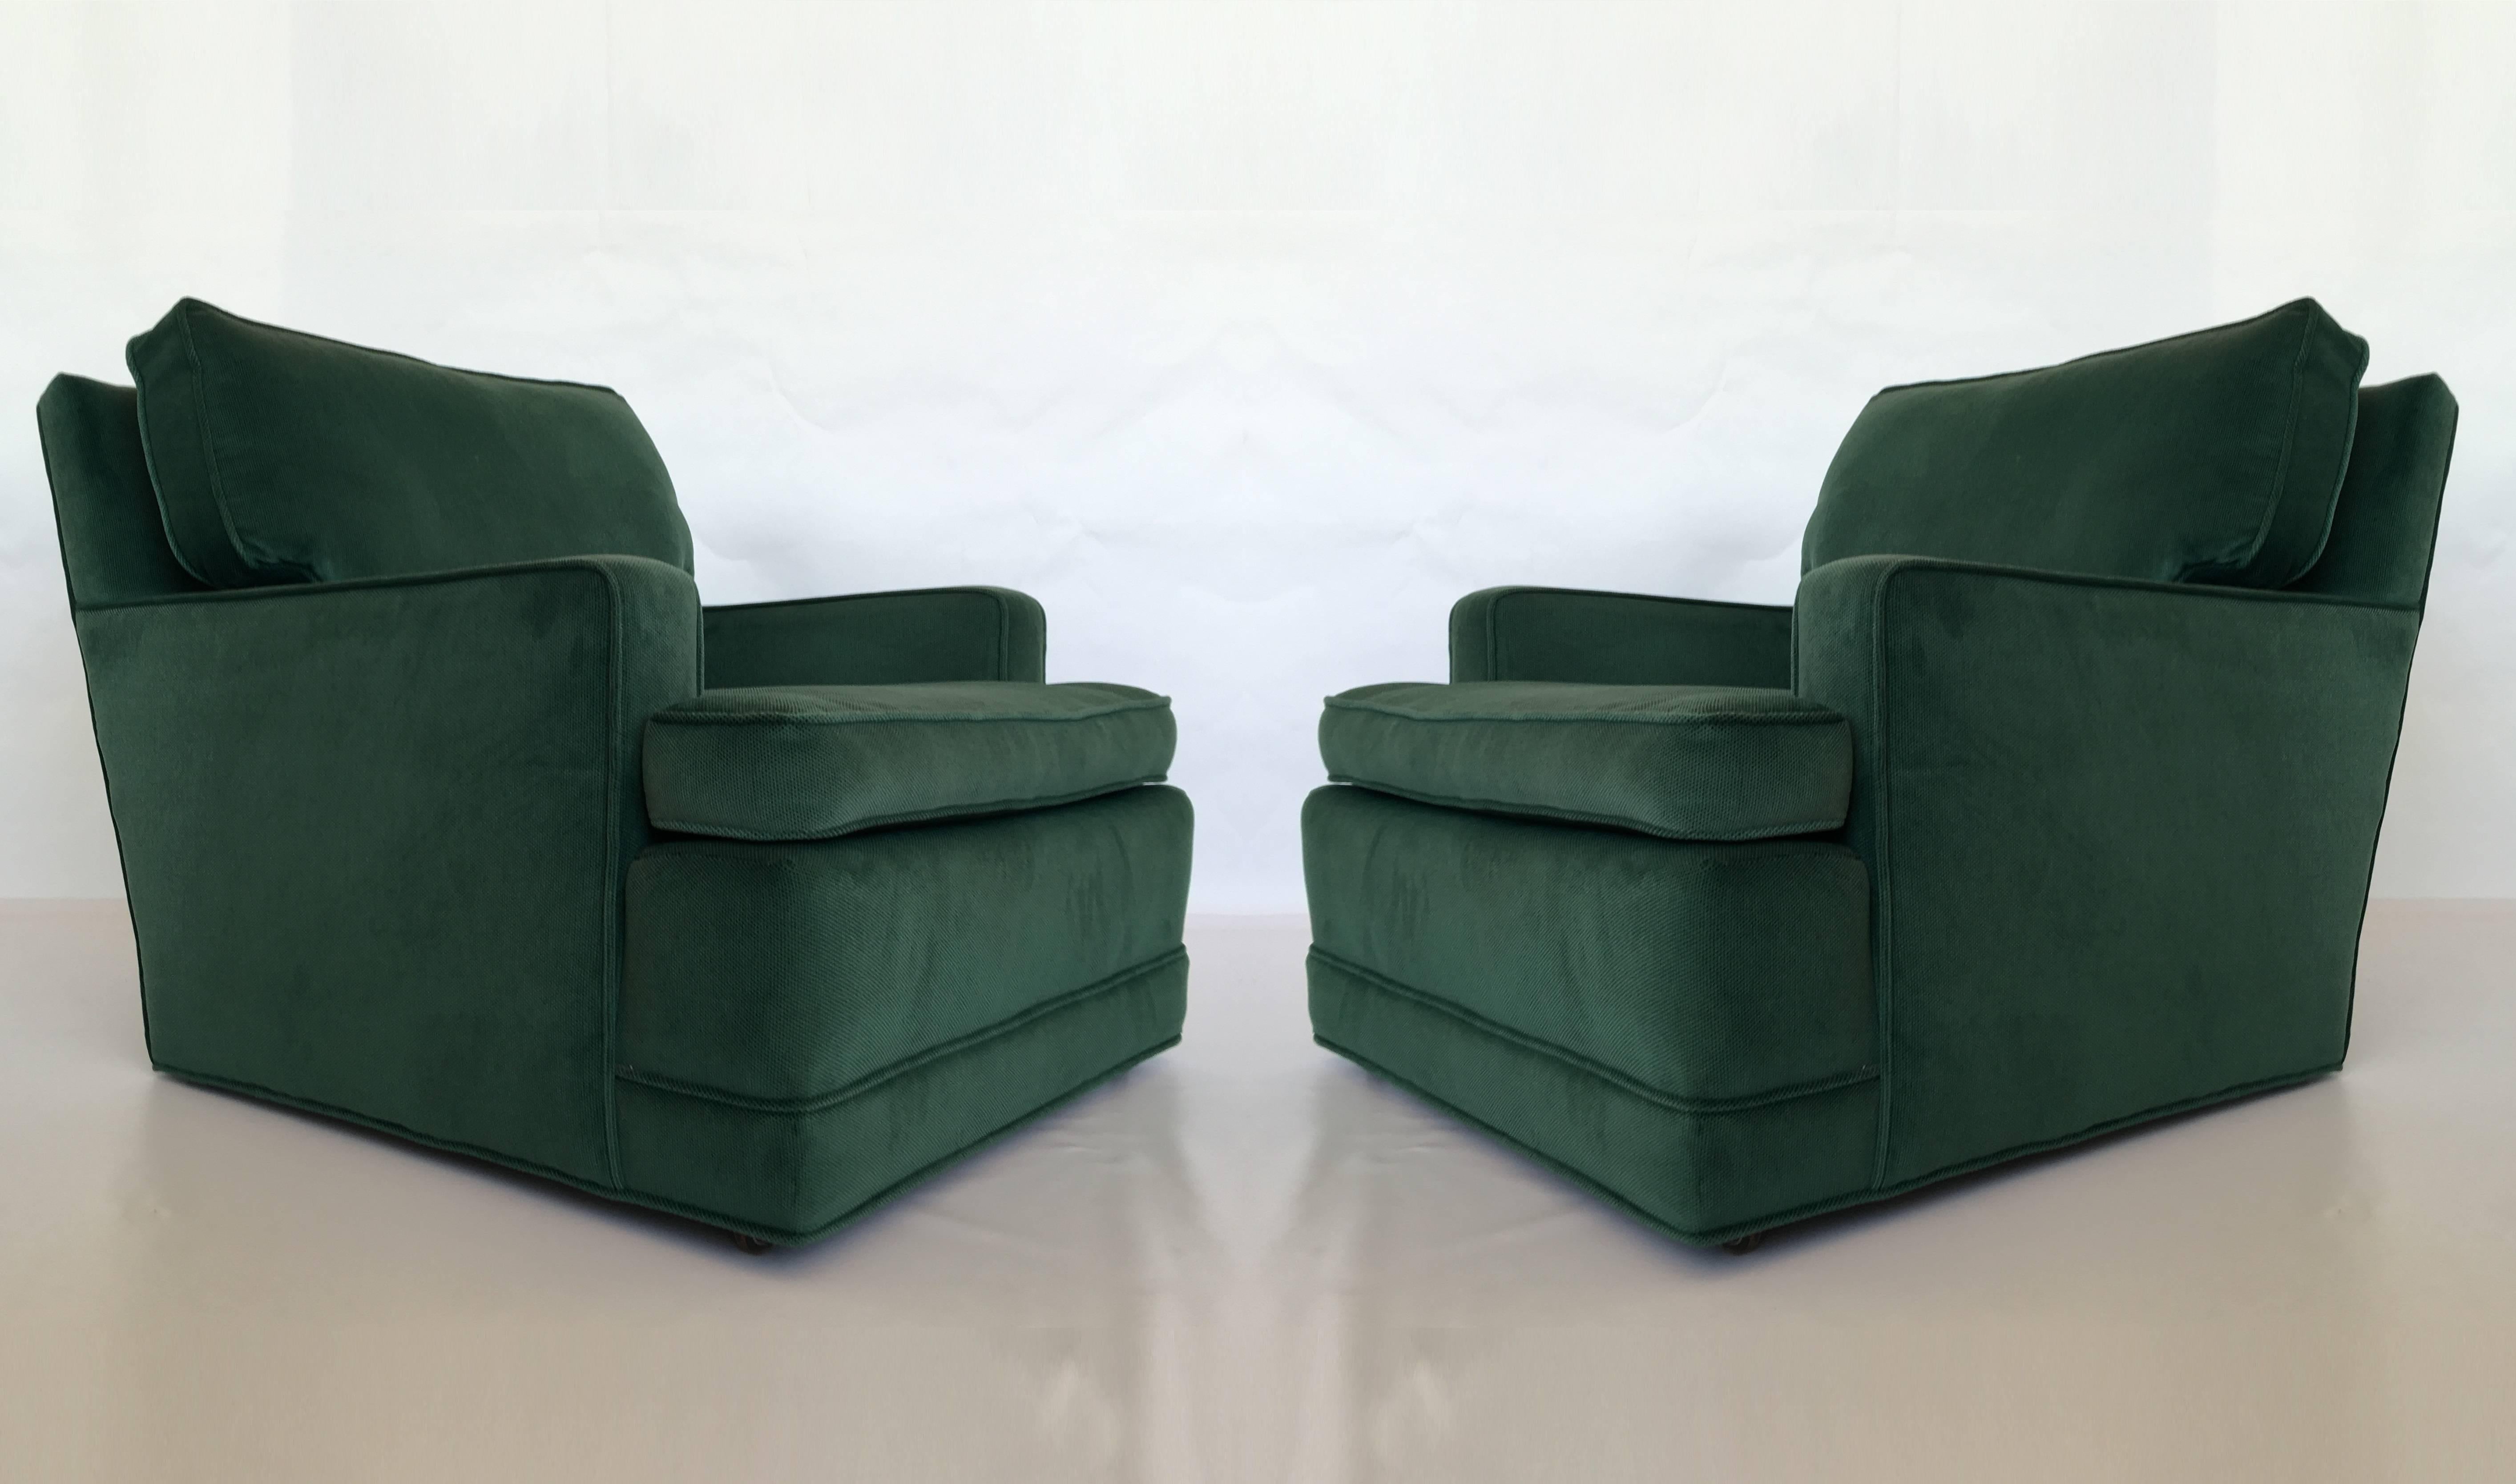 A beautiful pair of green Seniah chairs in the style of Billy Haines. Upholstered ledge-back chairs on casters, the loose seats and back cushions are filled with the down and feather. Comfortable and distinct, circa 1950s. They are in great original